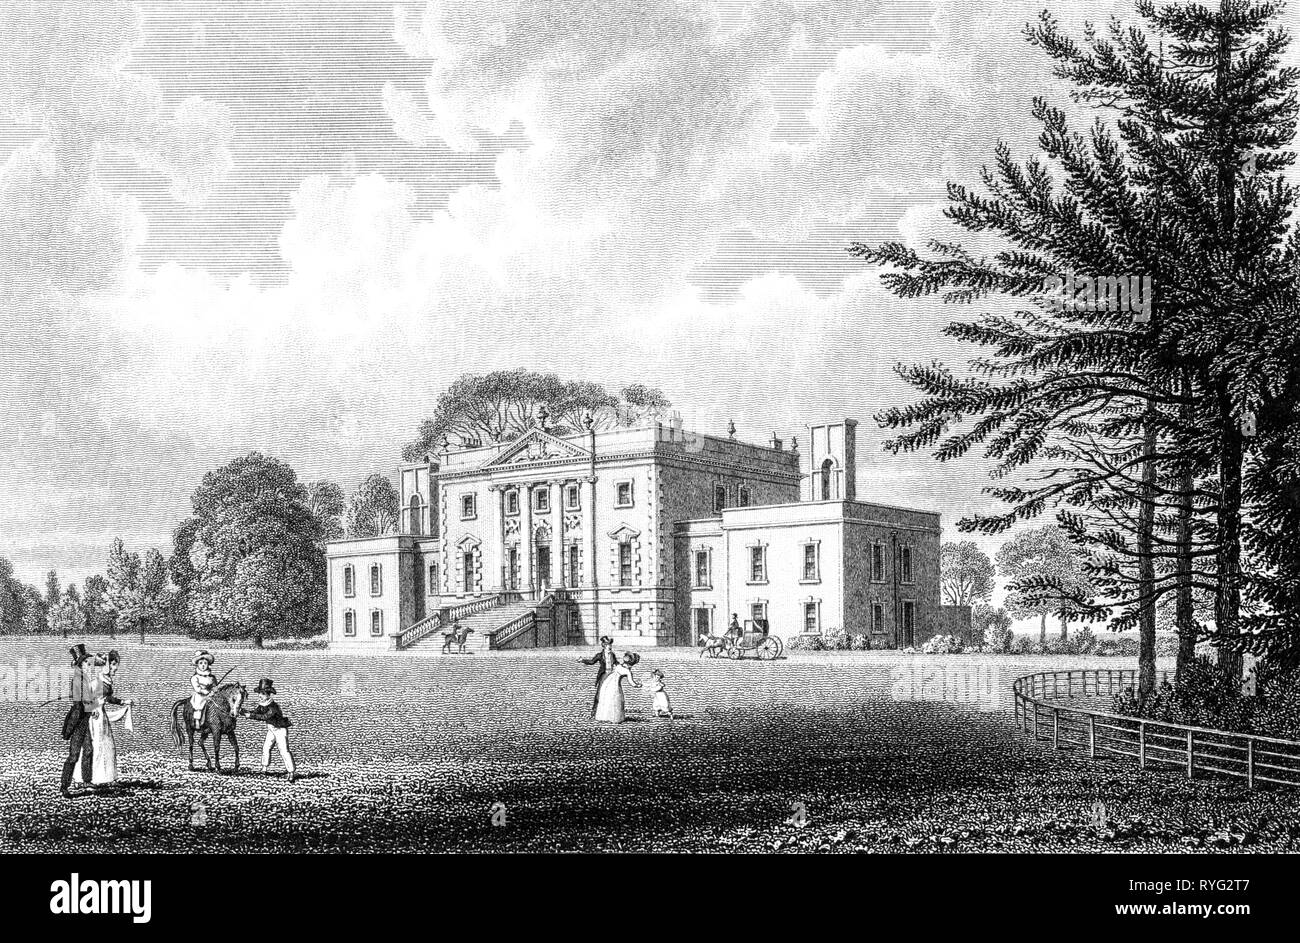 Engraving of Frampton Court Seat of Henry Clifford Clifford, Gloucestershire UK scanned at high resolution from a book published in 1825. Stock Photo